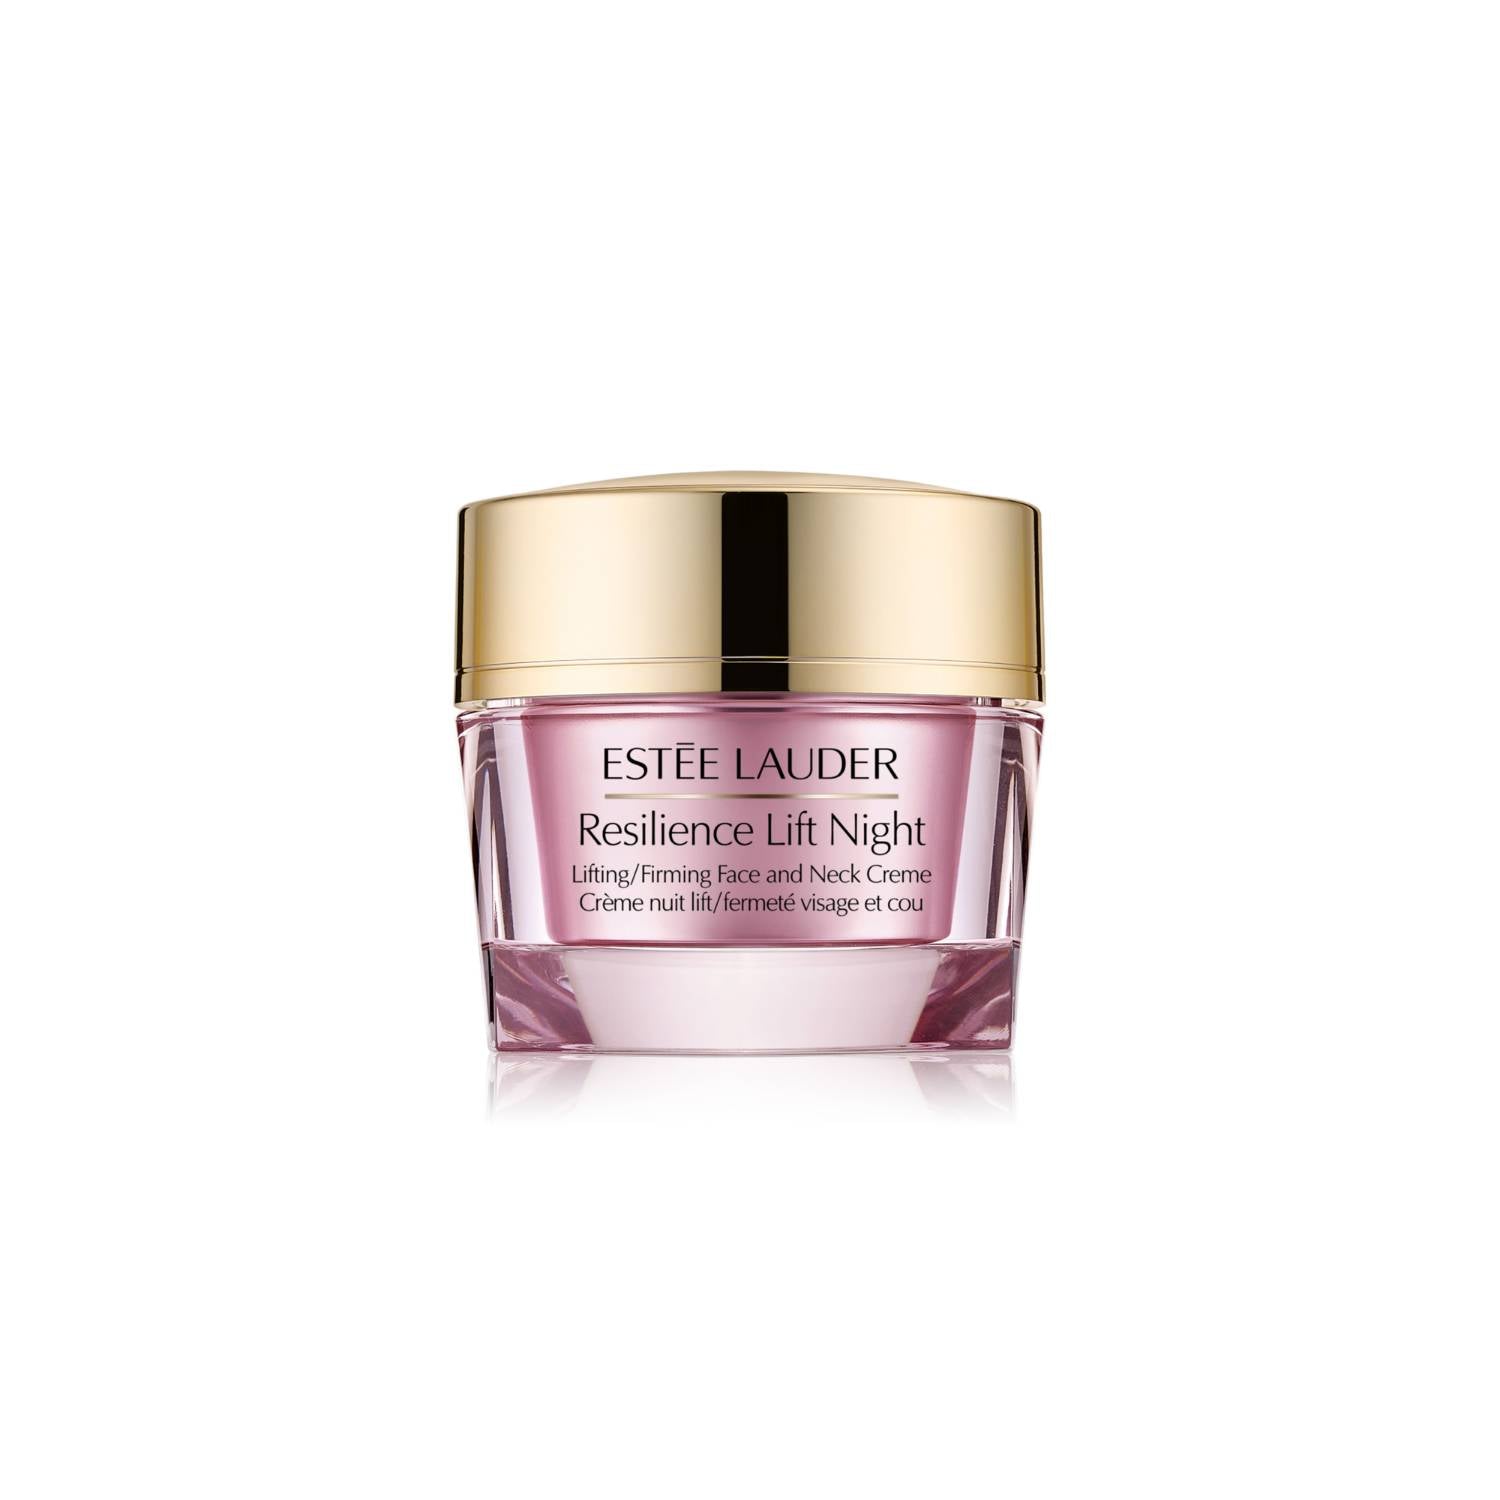 Resilience Lift Night Firming/Sculpting Face and Neck Crème